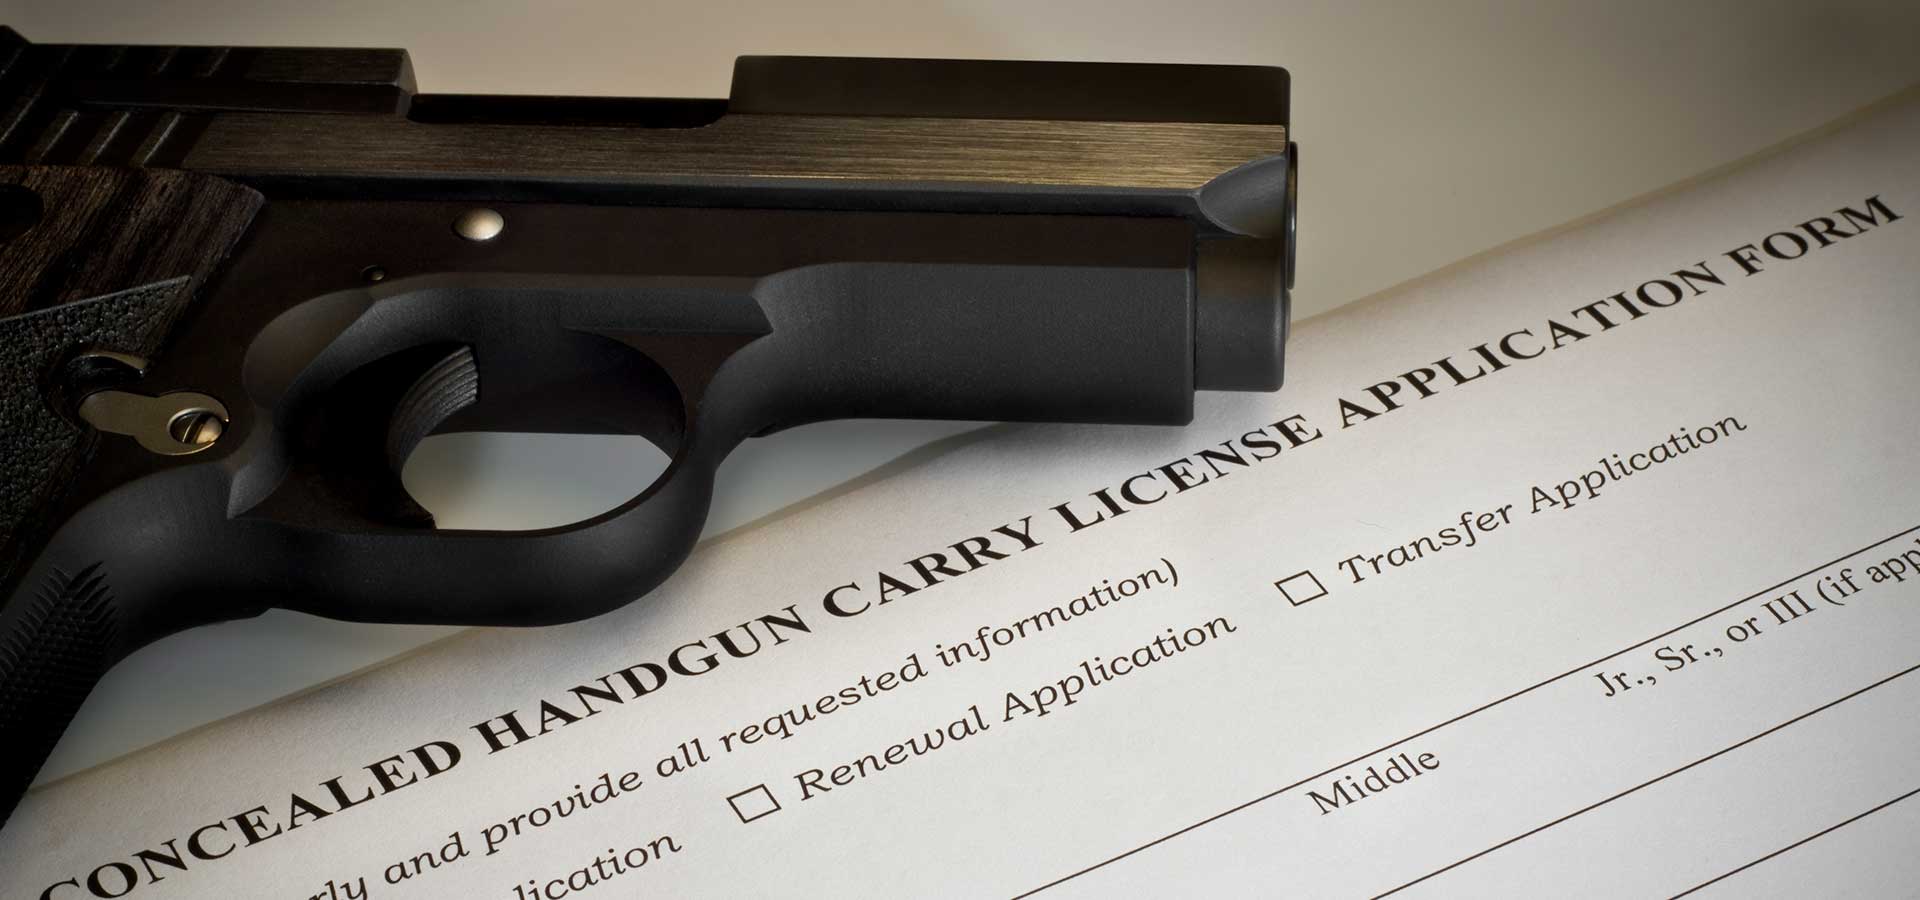 Our classes provide EVERYTHING you need to earn your Concealed Carry